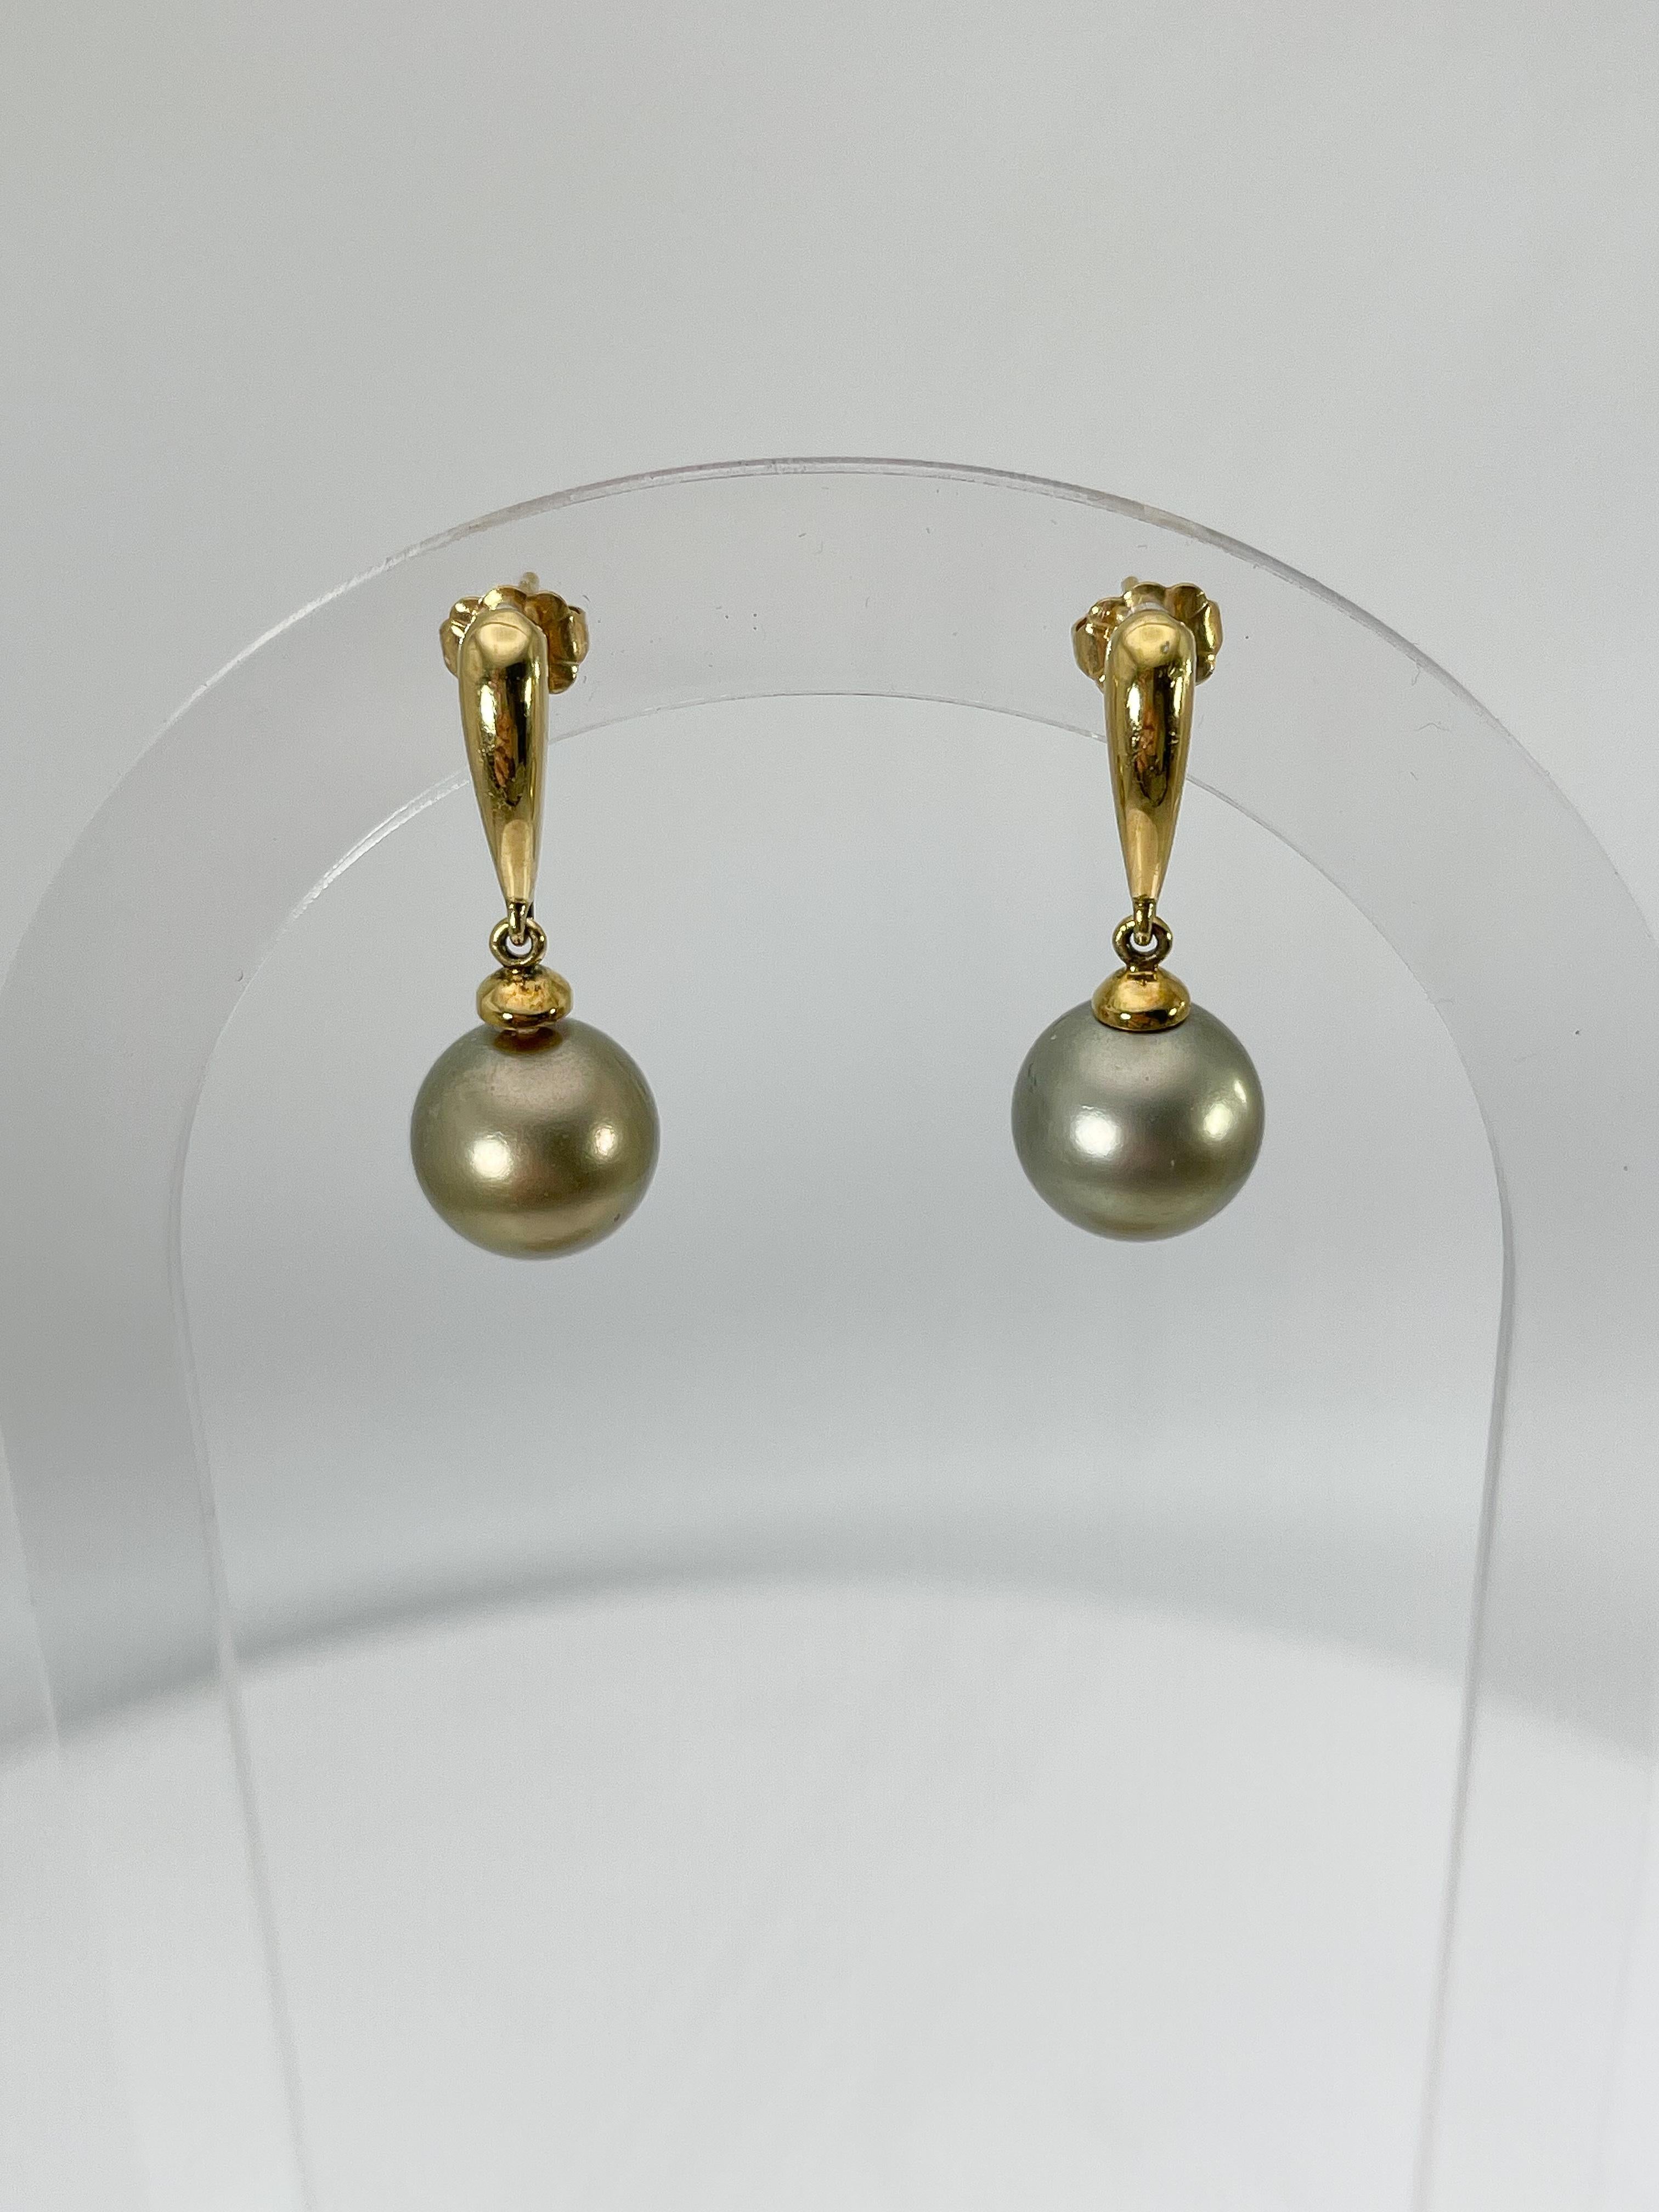 18k yellow gold Tahitian pearl drop earrings. The length of these earrings is 29mm, the diameter of the pearl is 11.1 mm, and the have a total weight of 7.9 grams.